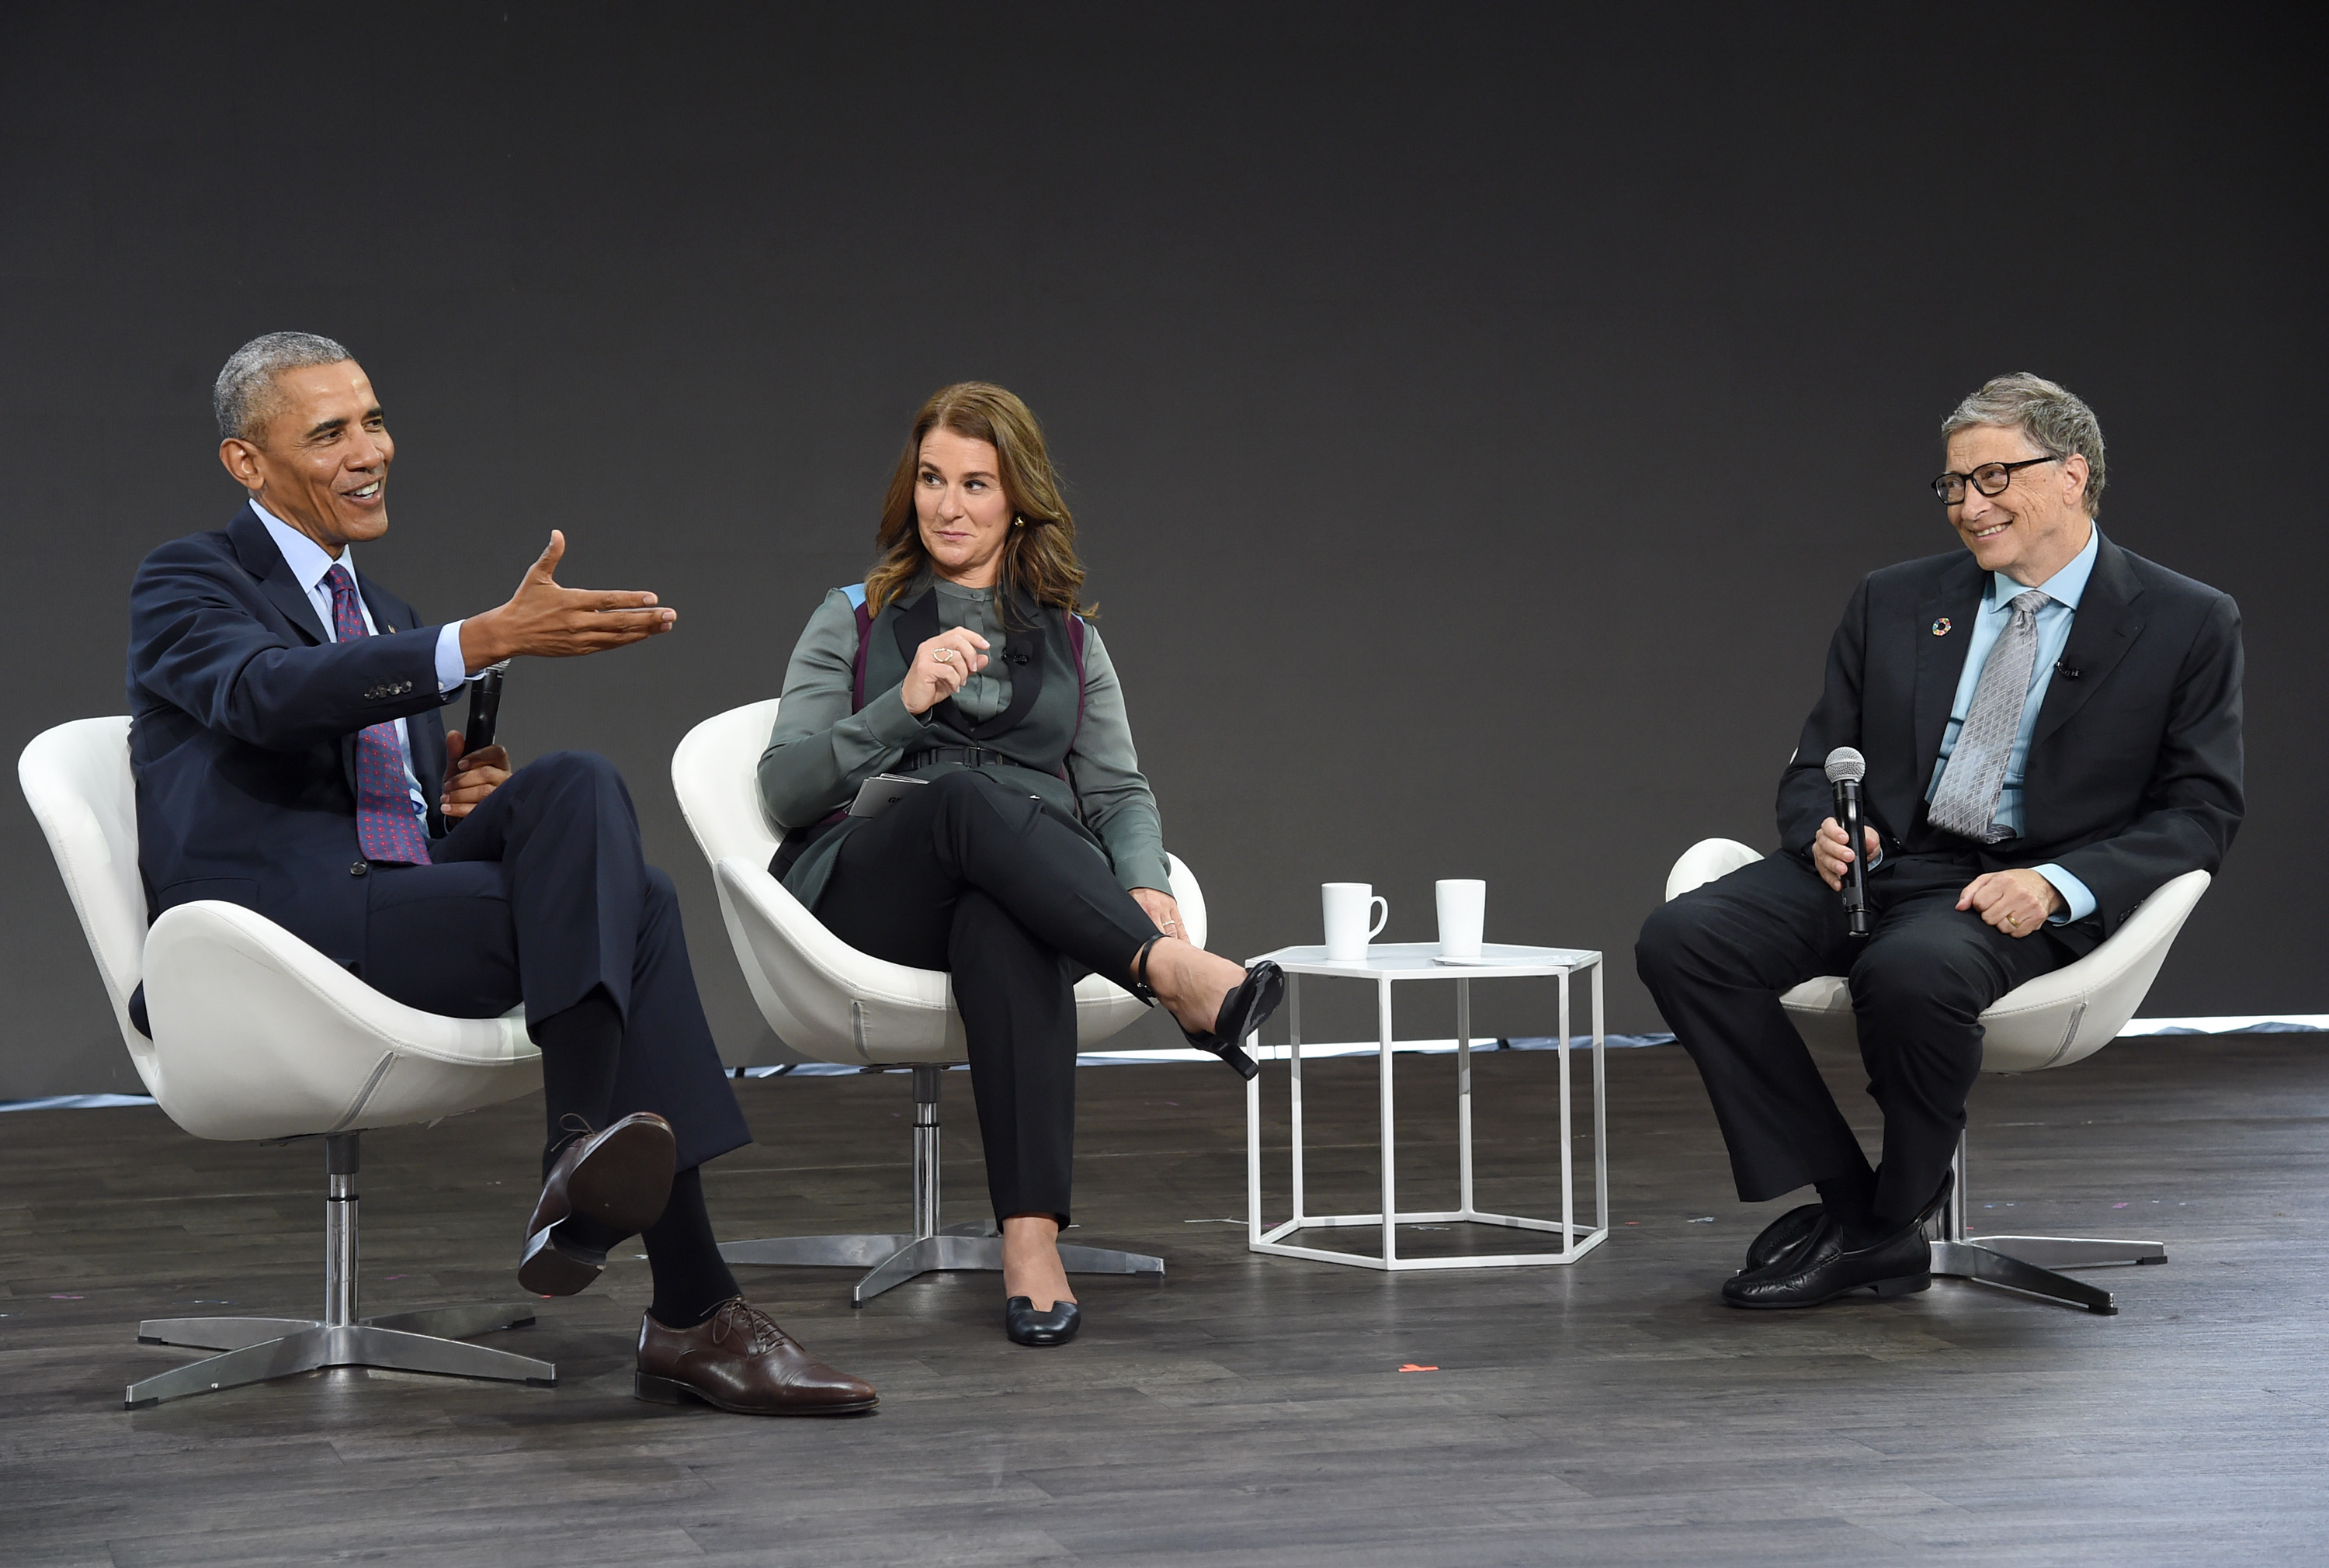 President Barack Obama, Melinda Gates and Bill Gates speak at Goalkeepers 2017, at Jazz at Lincoln Center on September 20, 2017 in New York City.  Goalkeepers is organized by the Bill & Melinda Gates Foundation to highlight progress against global poverty and disease, showcase solutions to help advance the Sustainable Development Goals (or Global Goals) and foster bold leadership to help accelerate the path to a more prosperous, healthy and just future. (Jamie McCarthy—Getty Images for Bill & Melinda Gates Foundation)